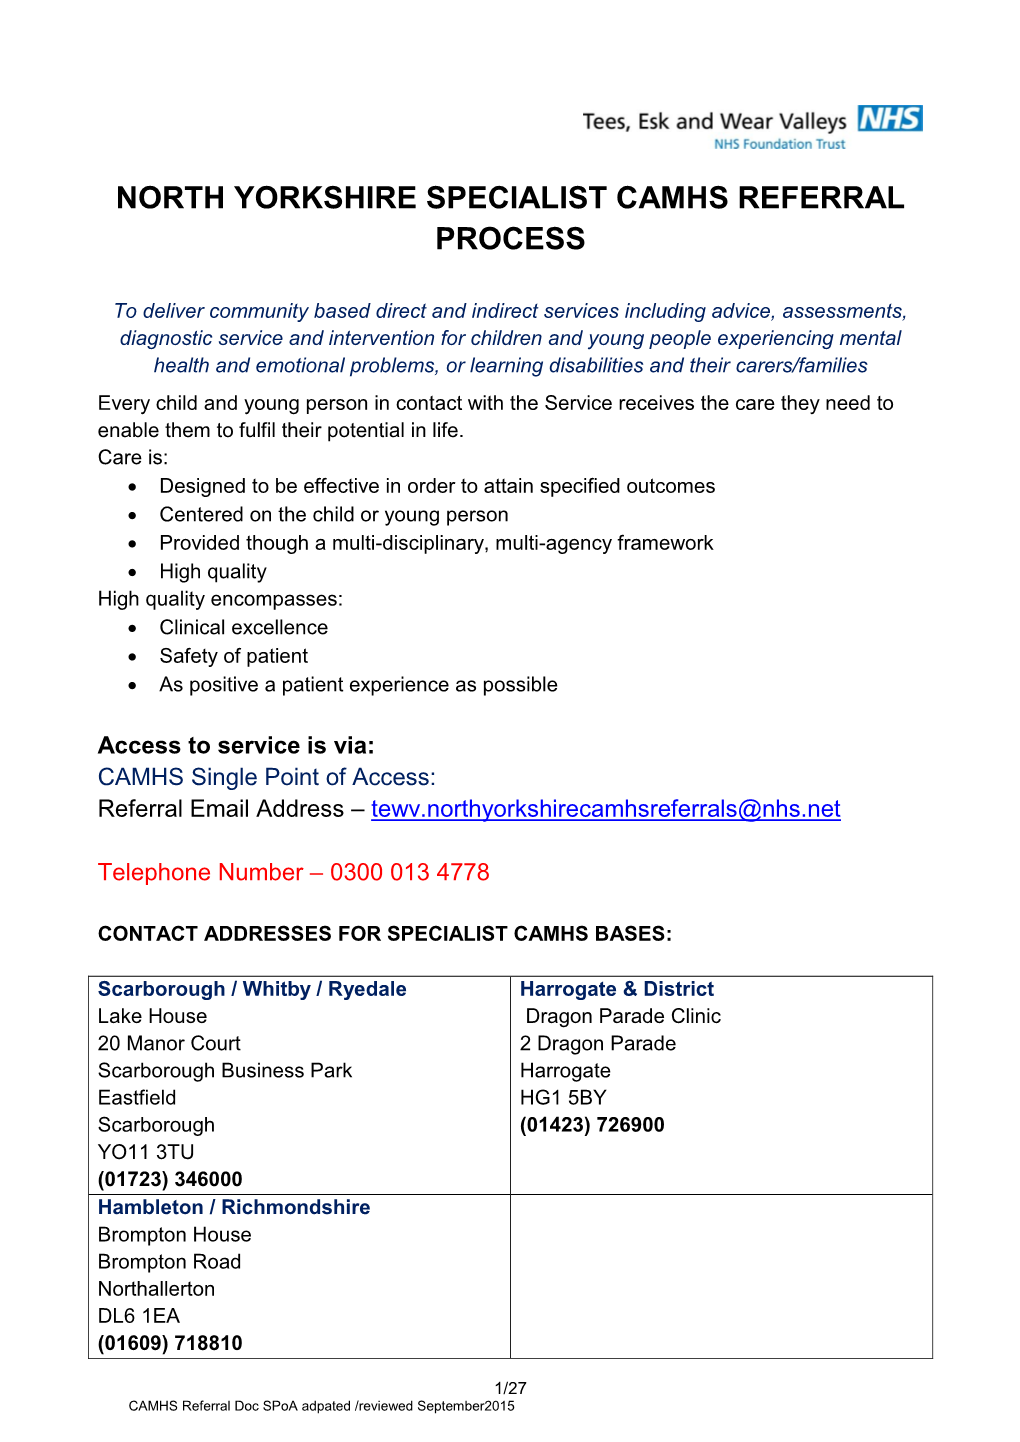 North Yorkshire Specialist Camhs Referral Process